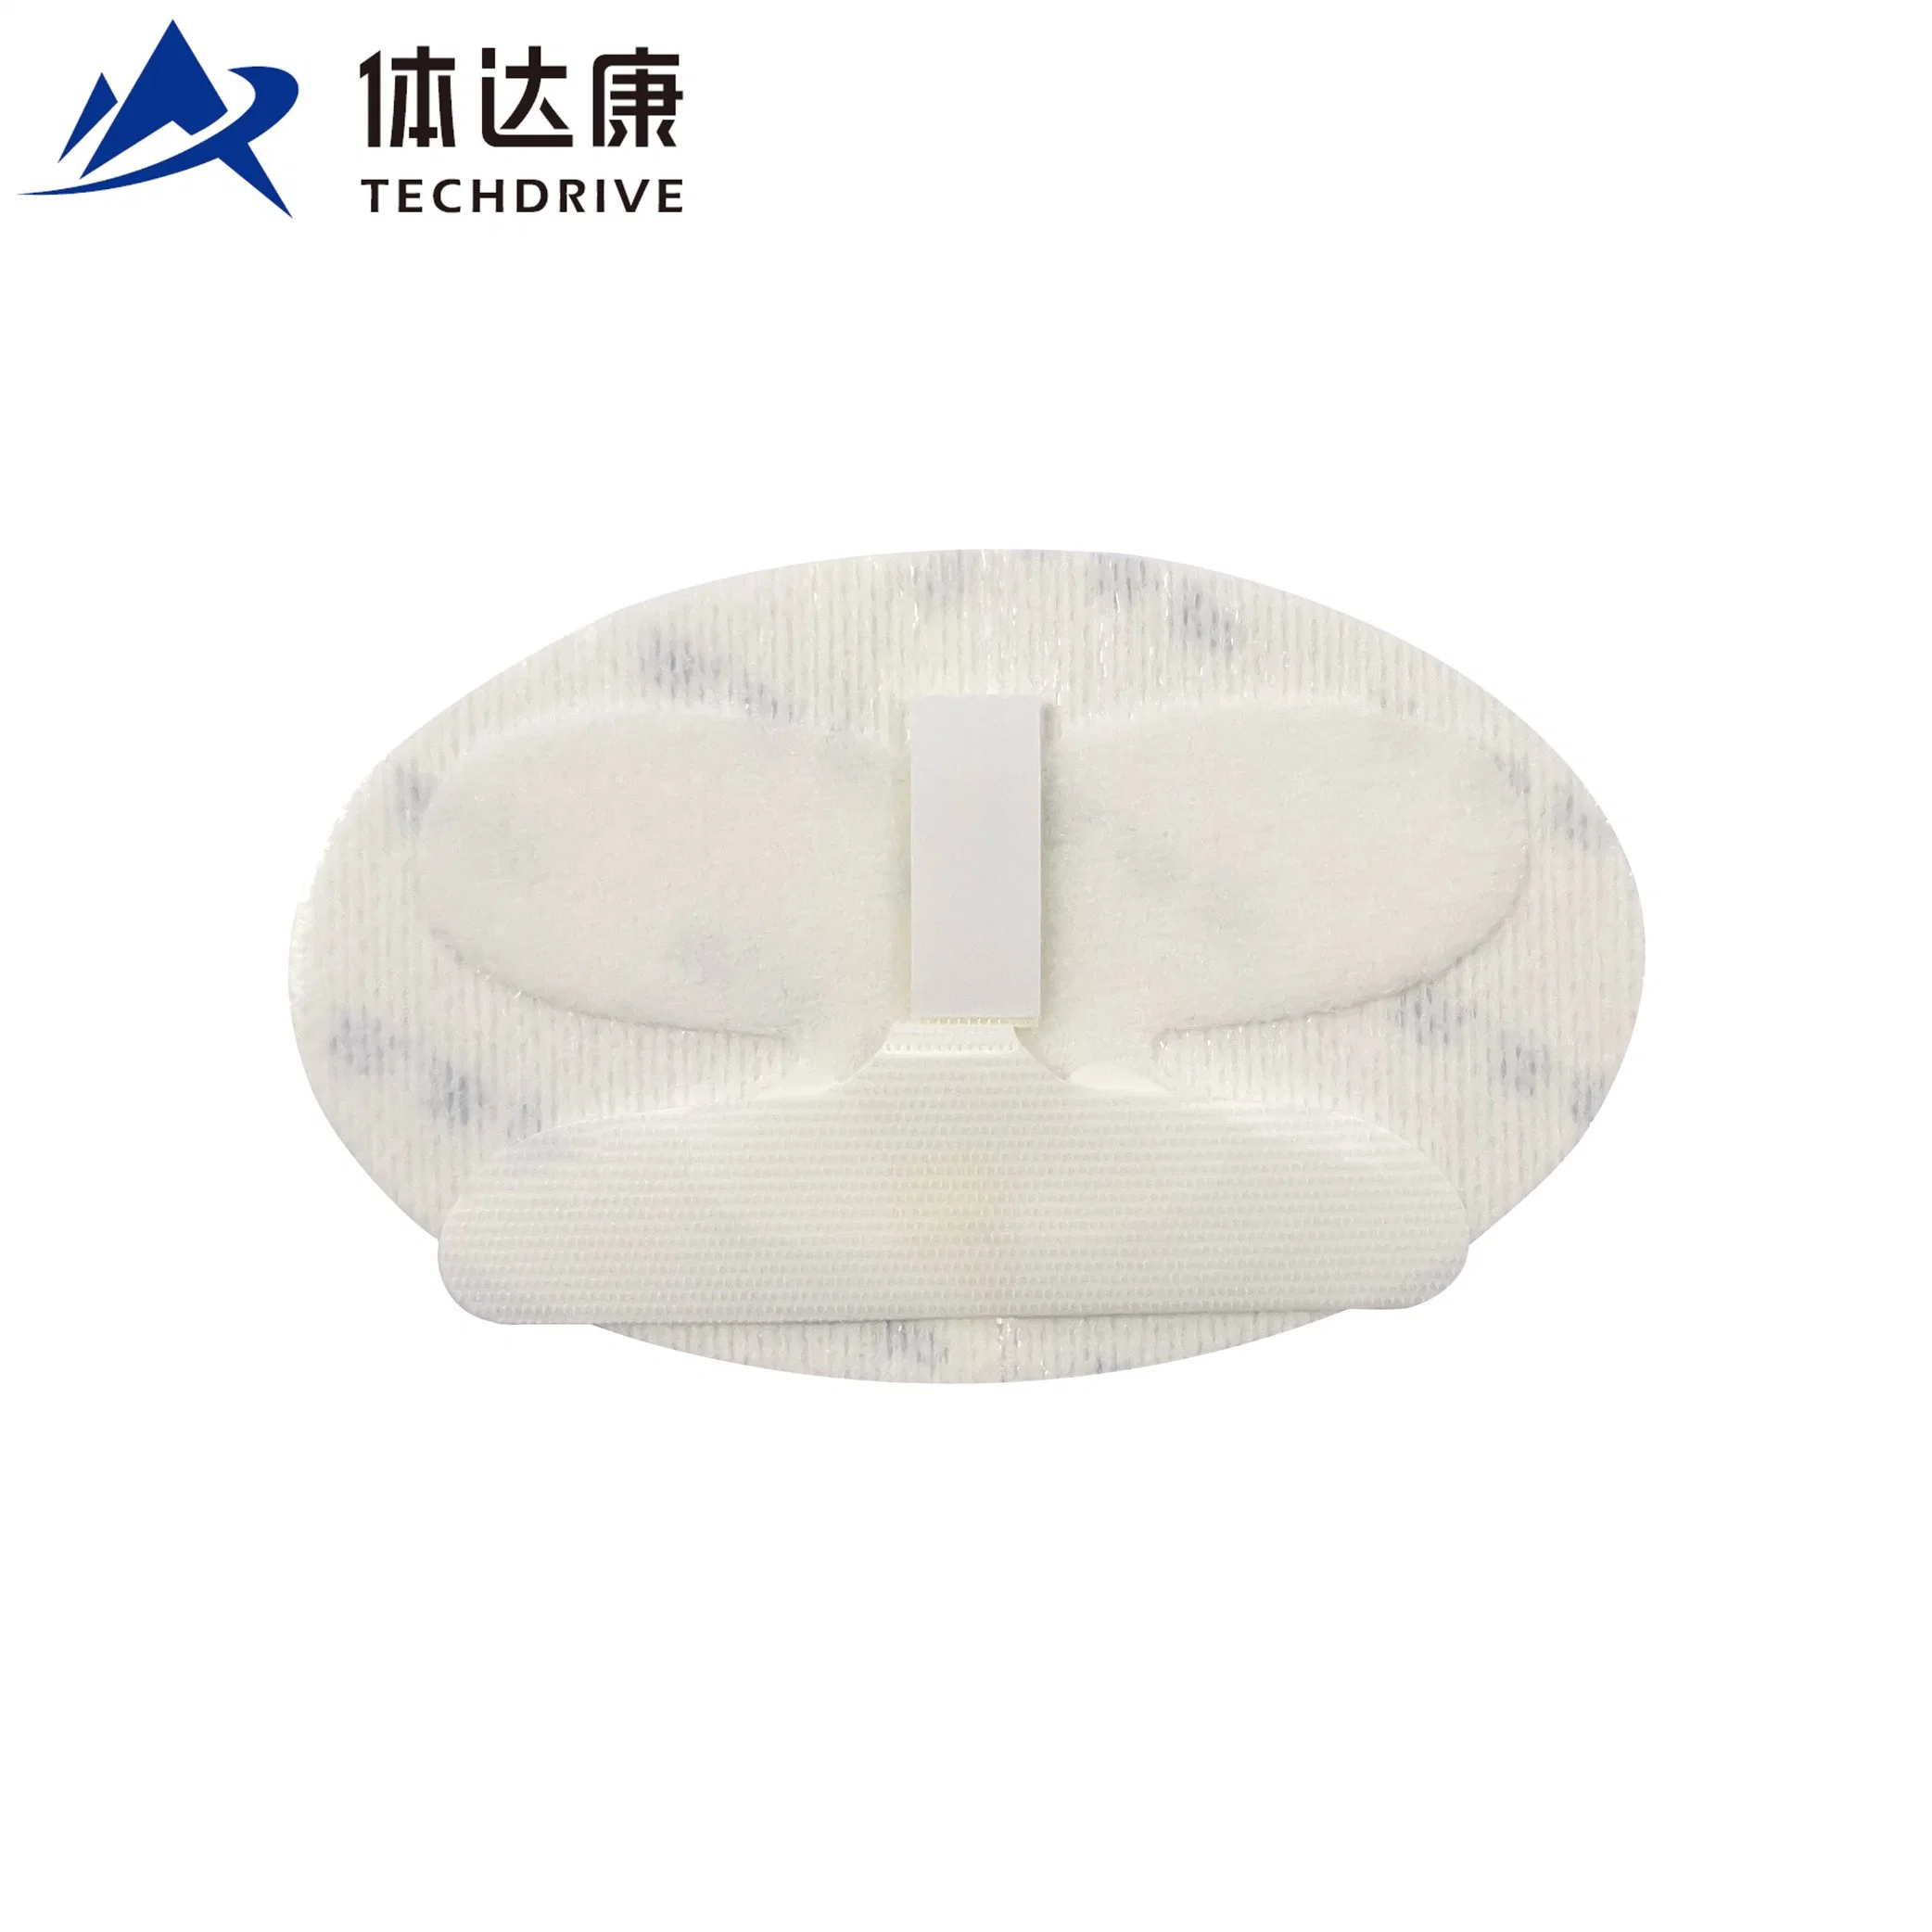 Medical Supplies Disposable Products Epidural Catheter Securement Device Holde for Feeding Tubes